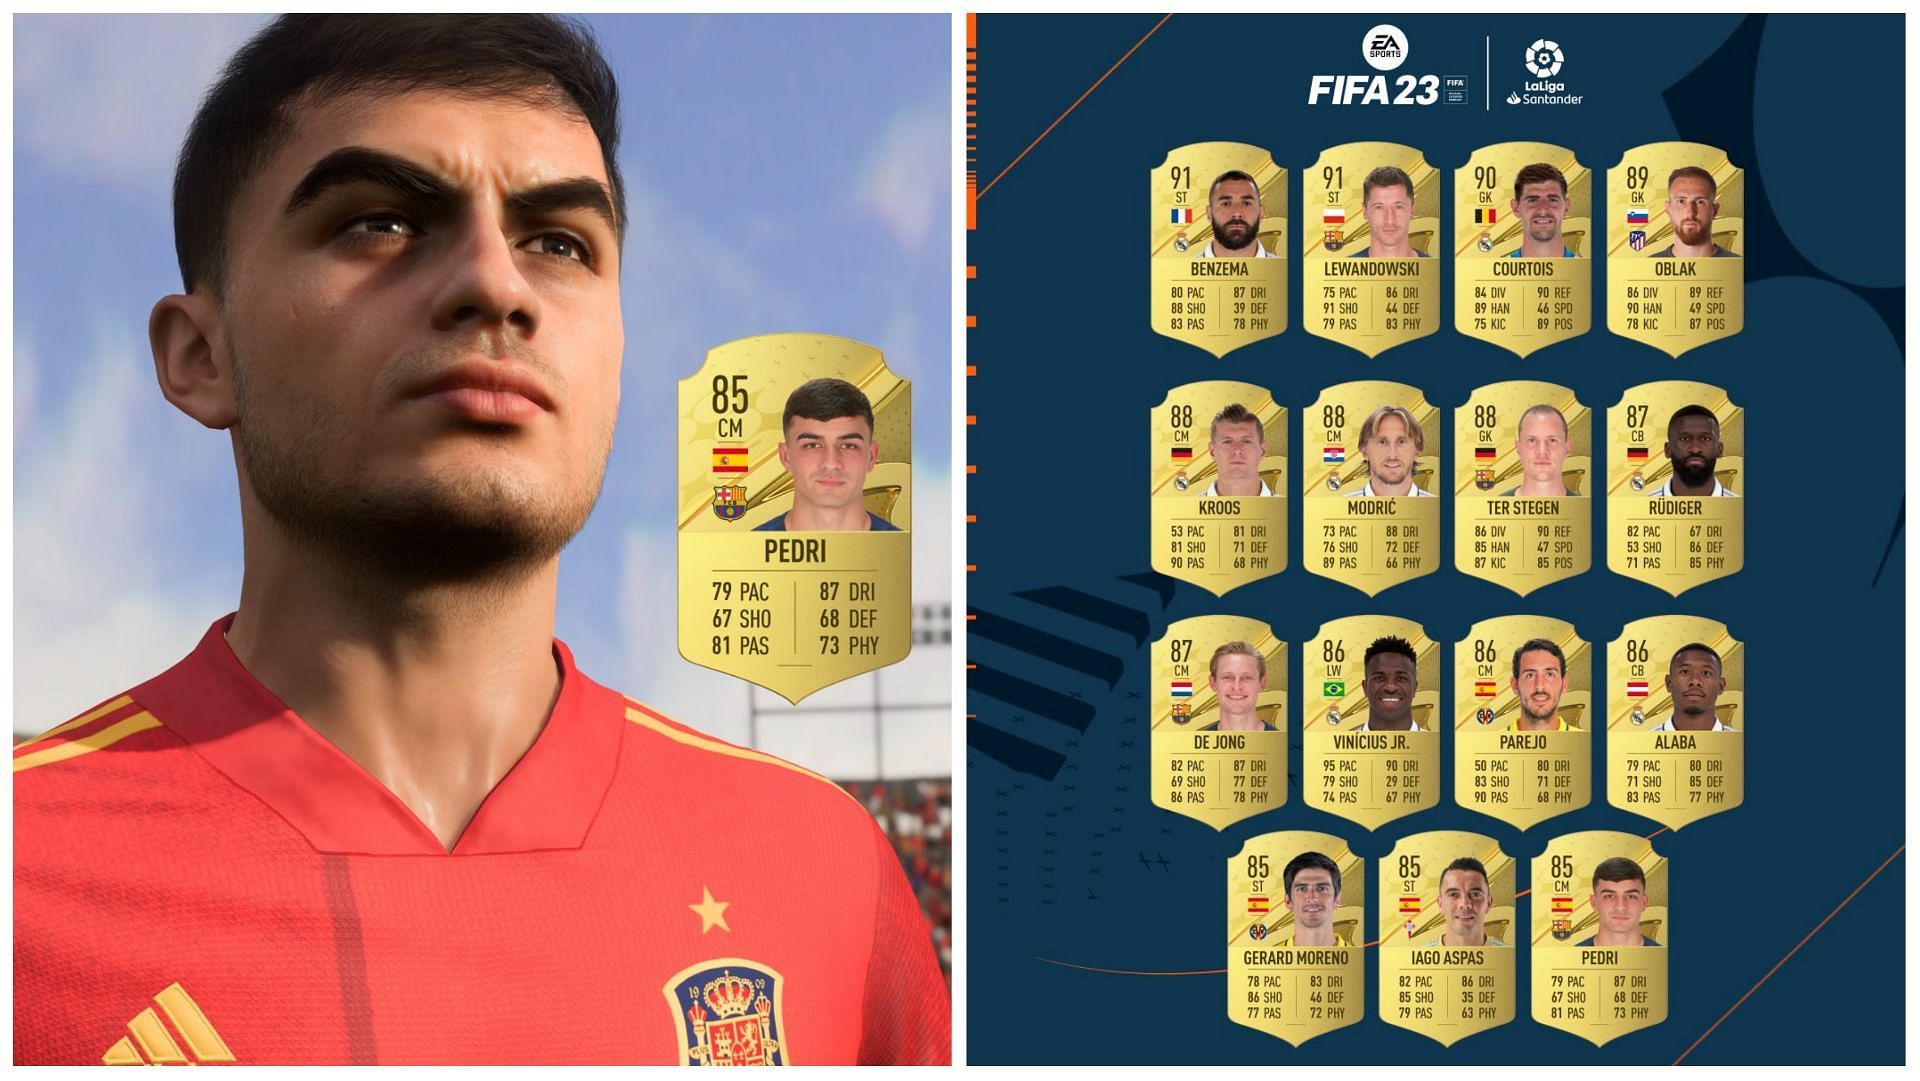 The FIFA 23 ratings reveal for the highest rated La Liga players has led to commotion on social media (Images via EA Sports)